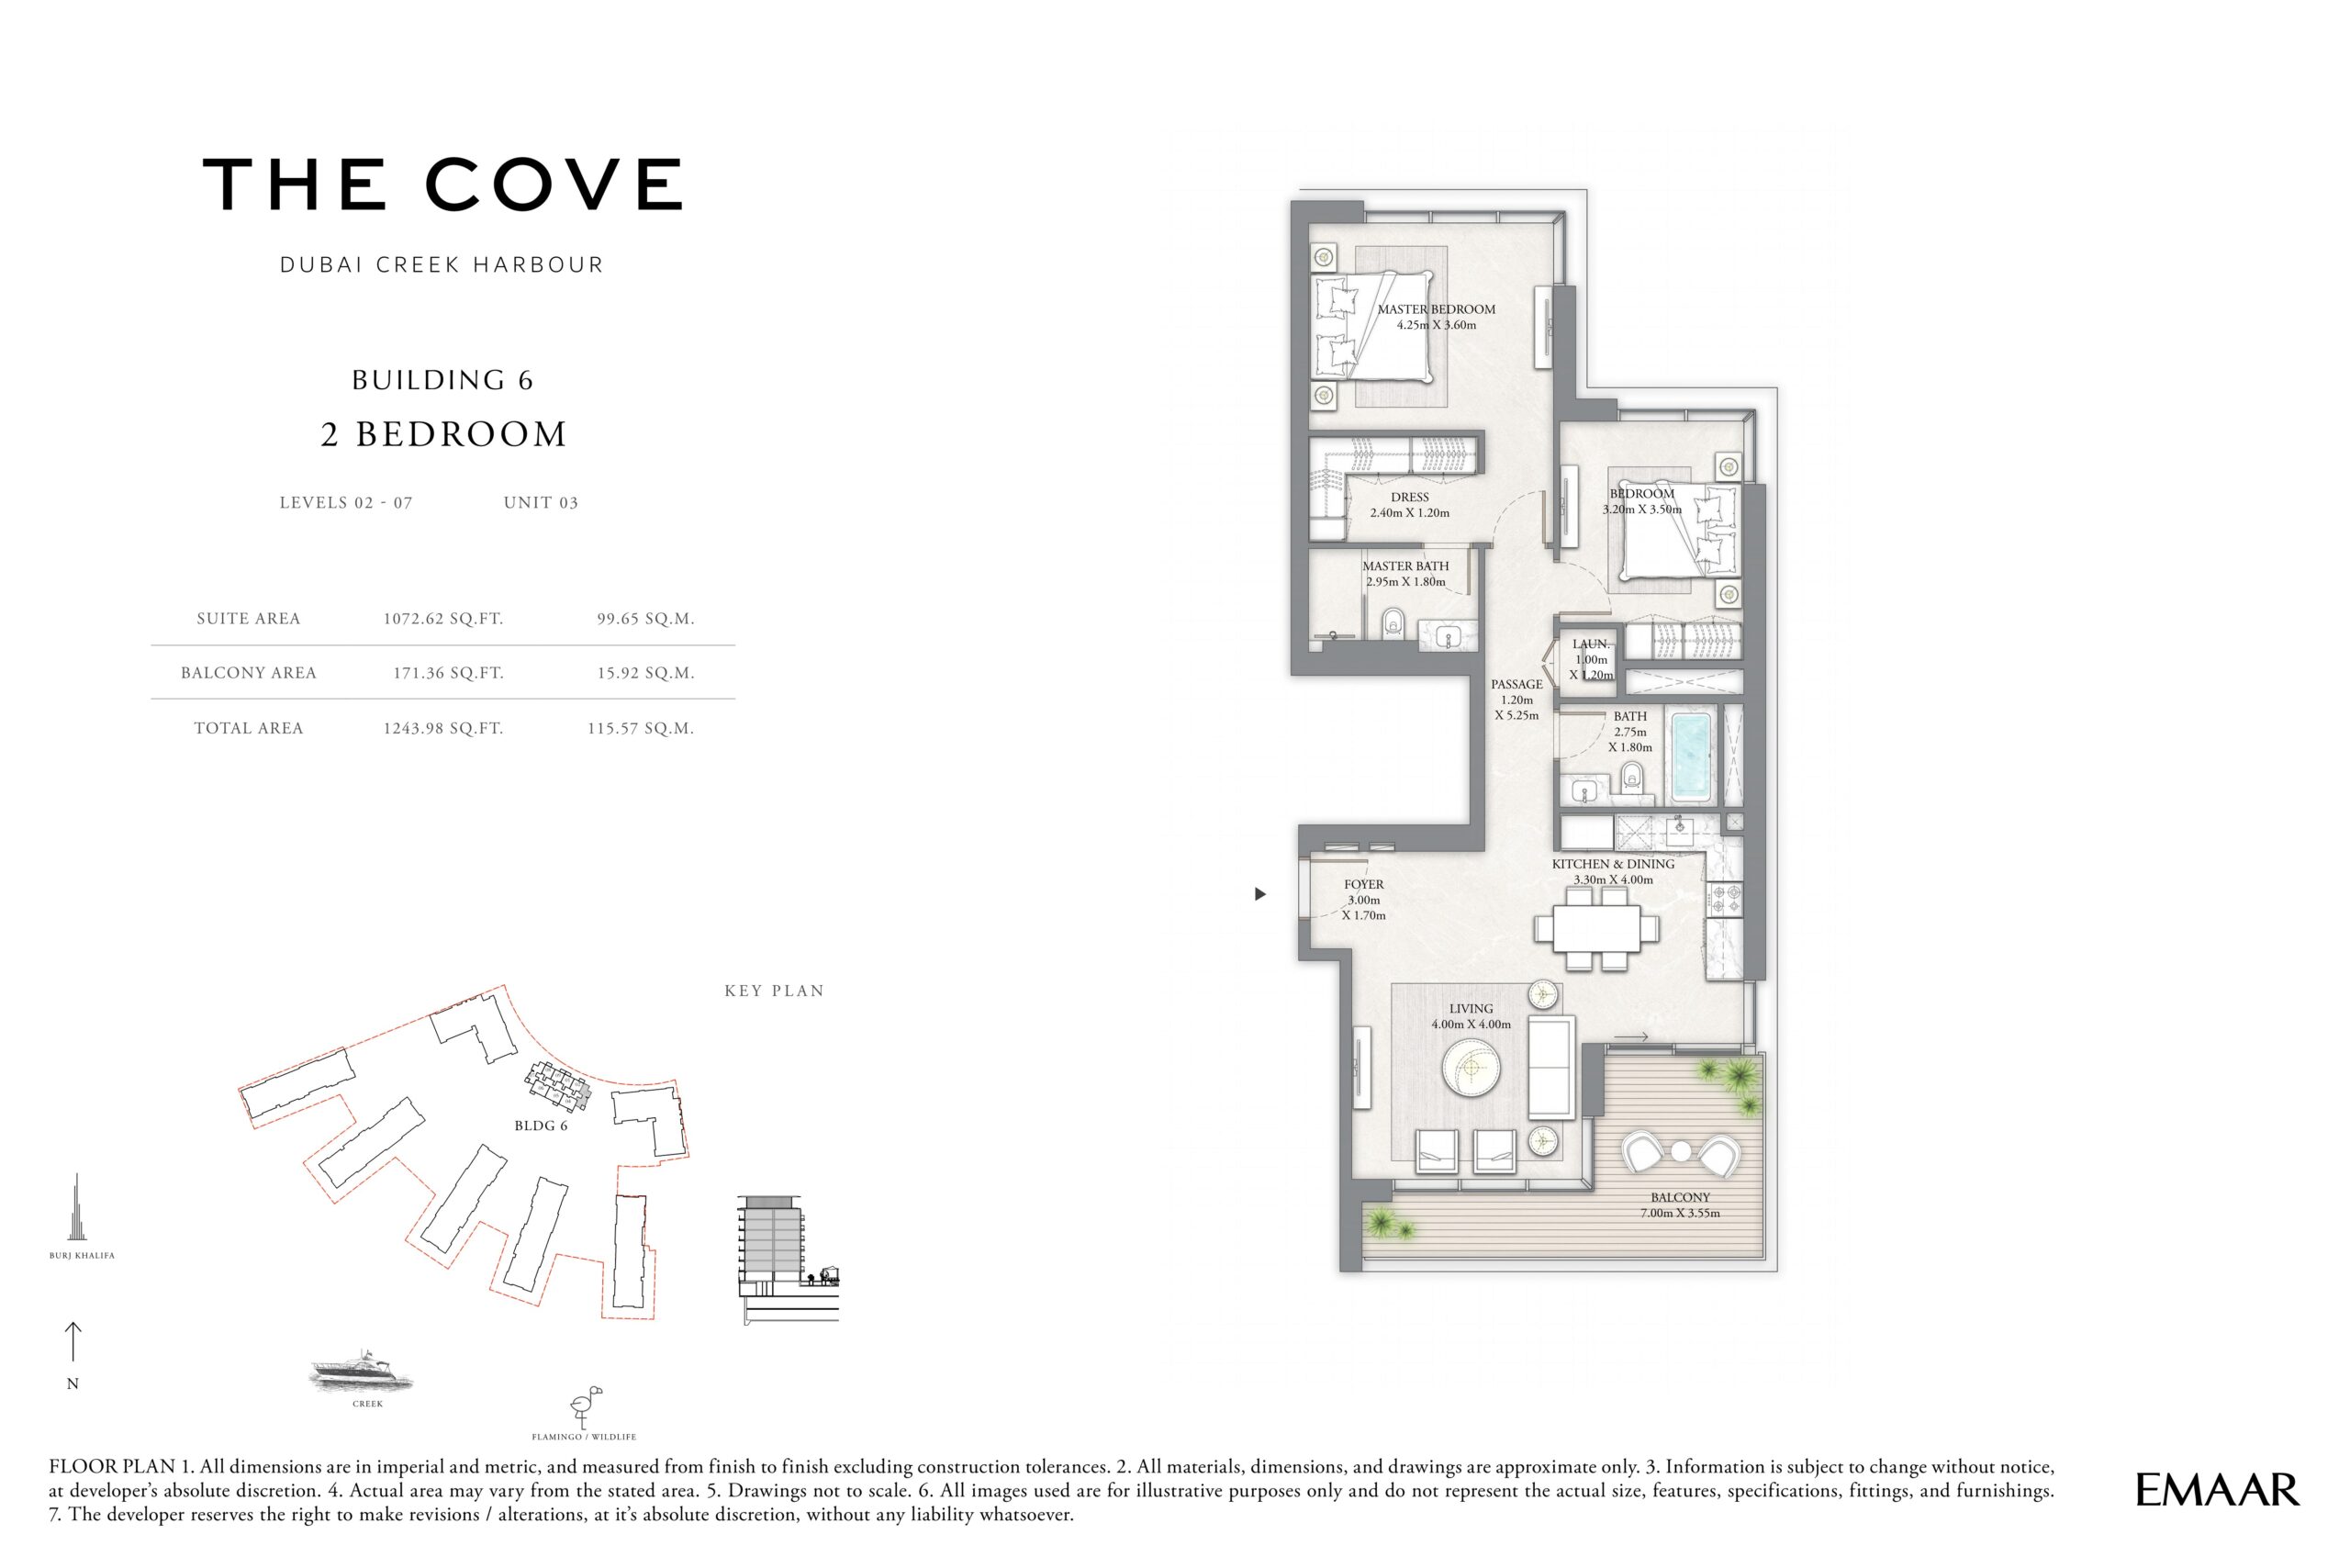 Emaar - The Cove Phase 2 - Drive Creek Harbour